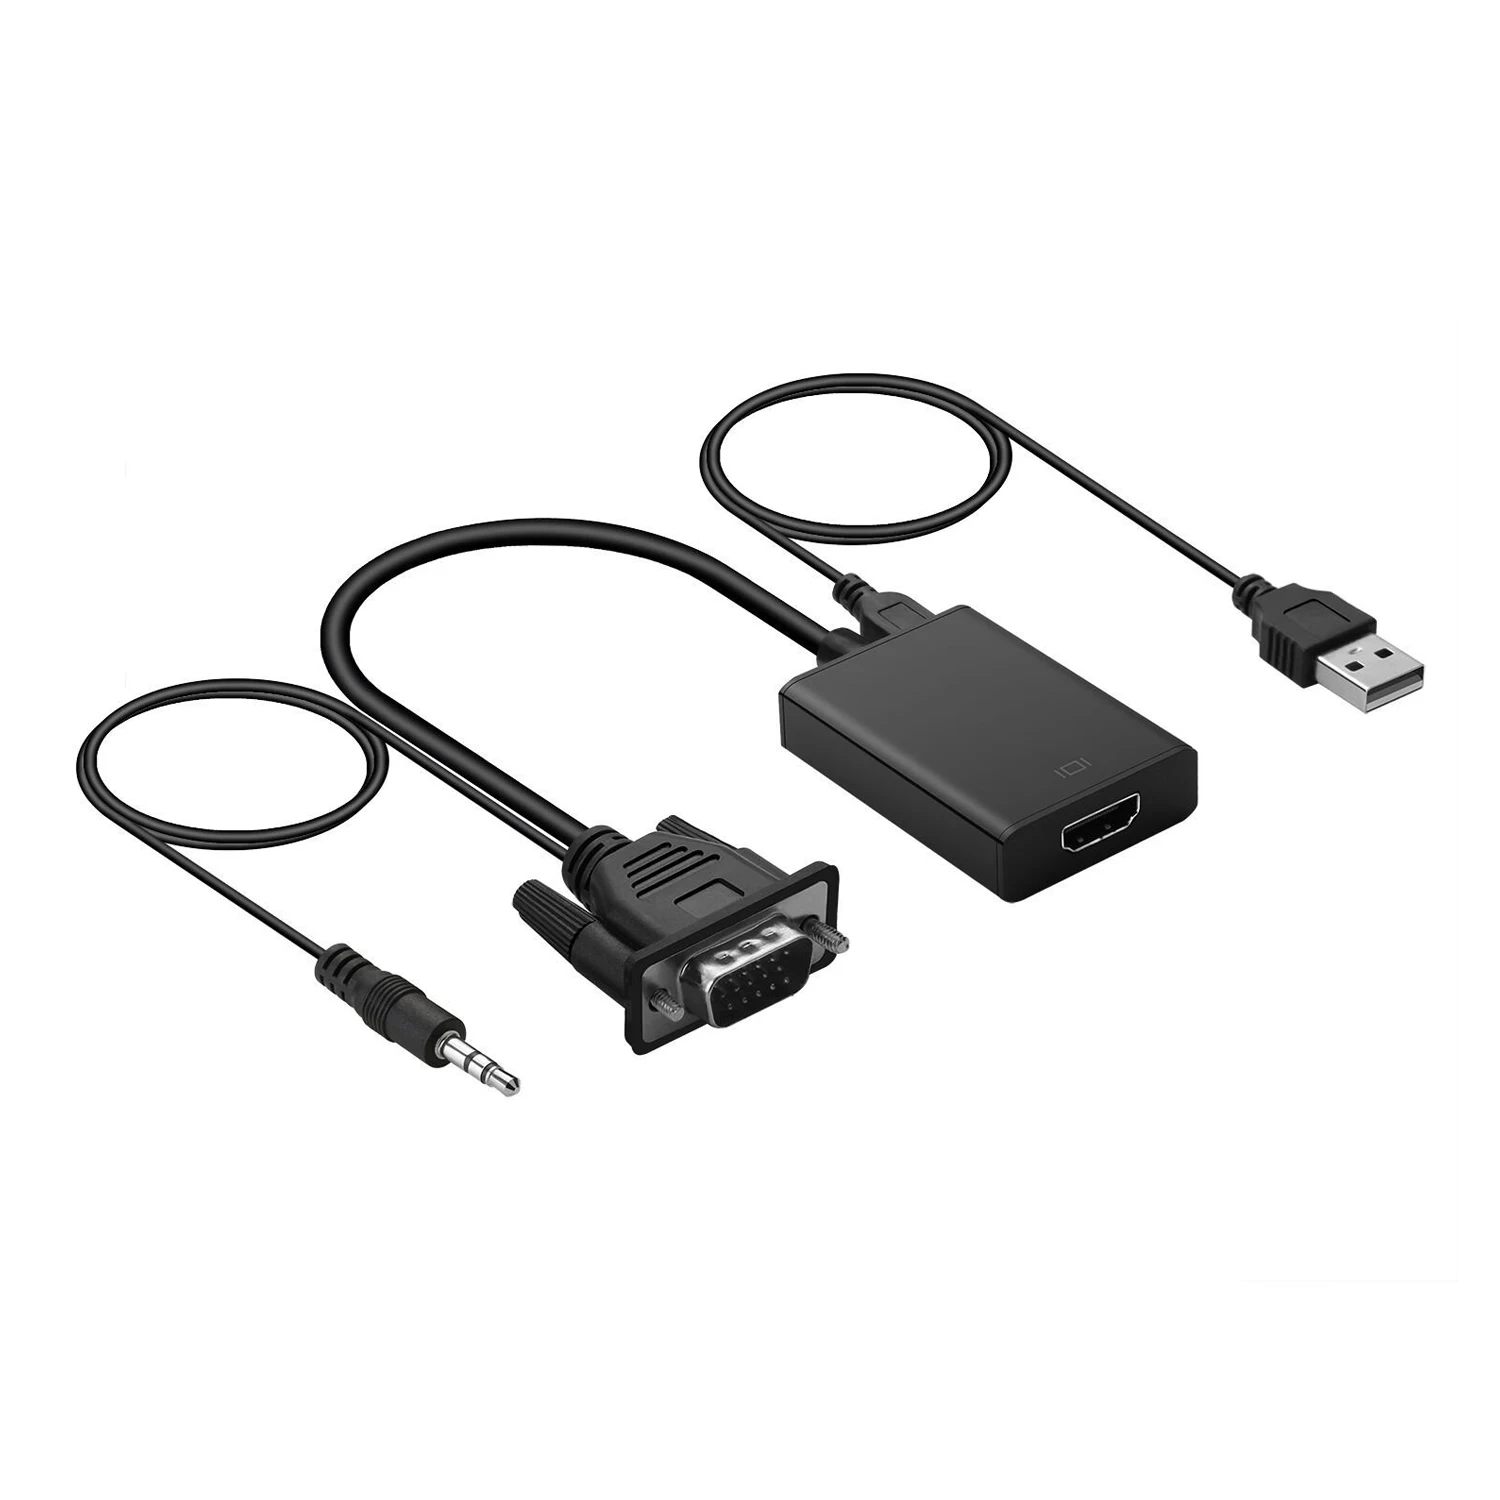 TOP VGA To HDMI Output 1080P HD Audio TV AV HDTV Video Cable Converter Adapter for Connecting PC Laptop Notebook to Di | Электроника